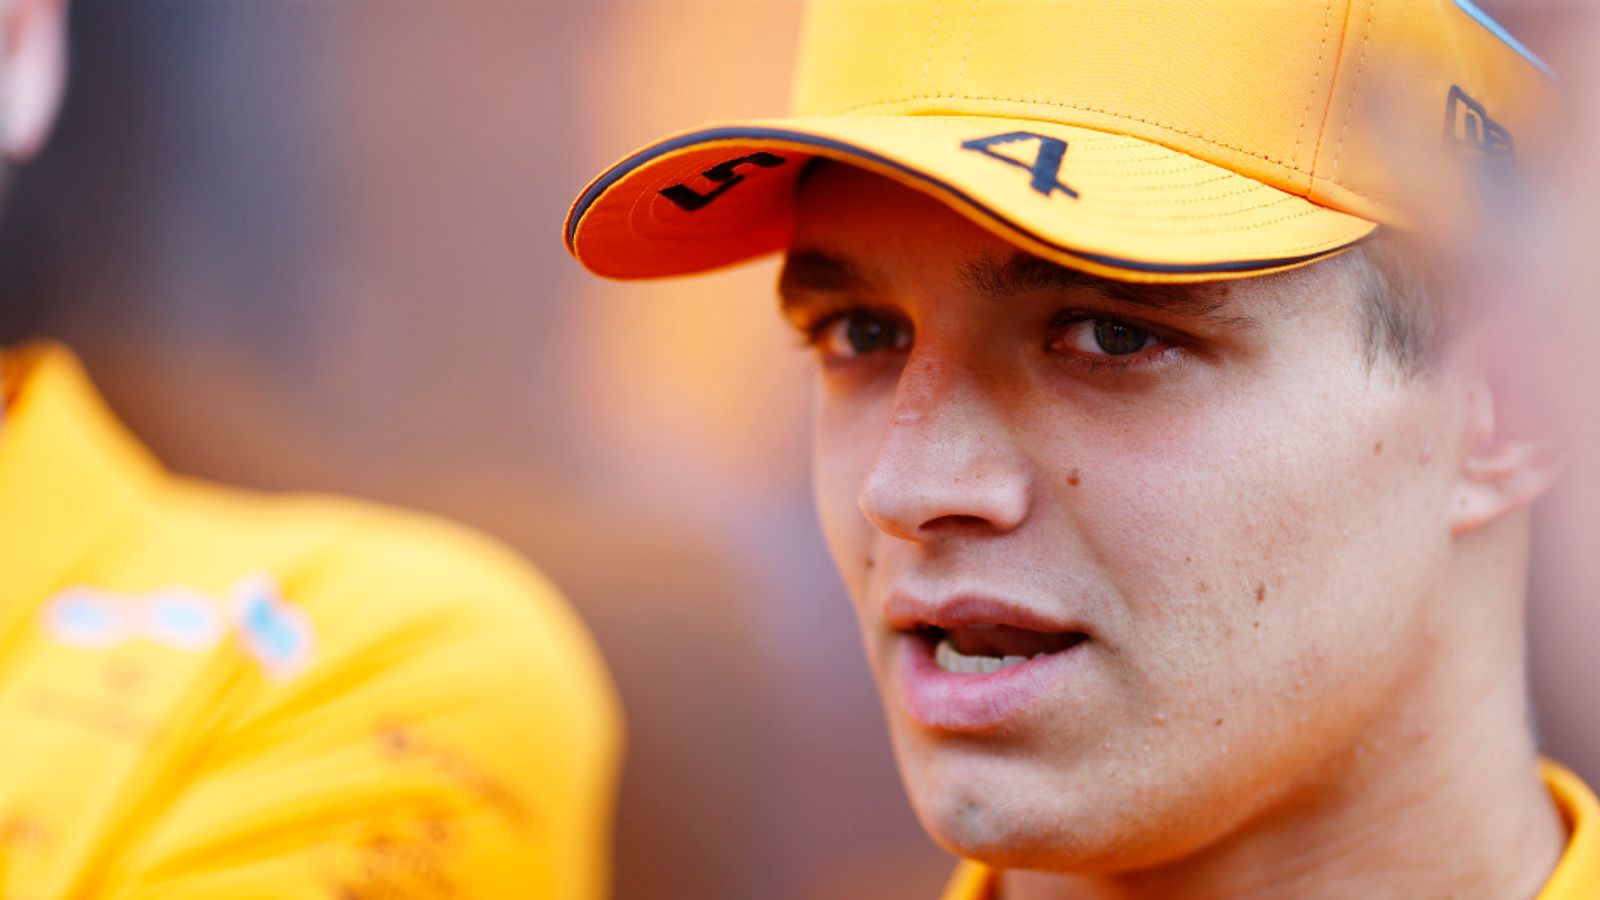 Lando Norris: McLaren driver says criticism after Silverstone was 'not unfair' as team look to win in Hungary